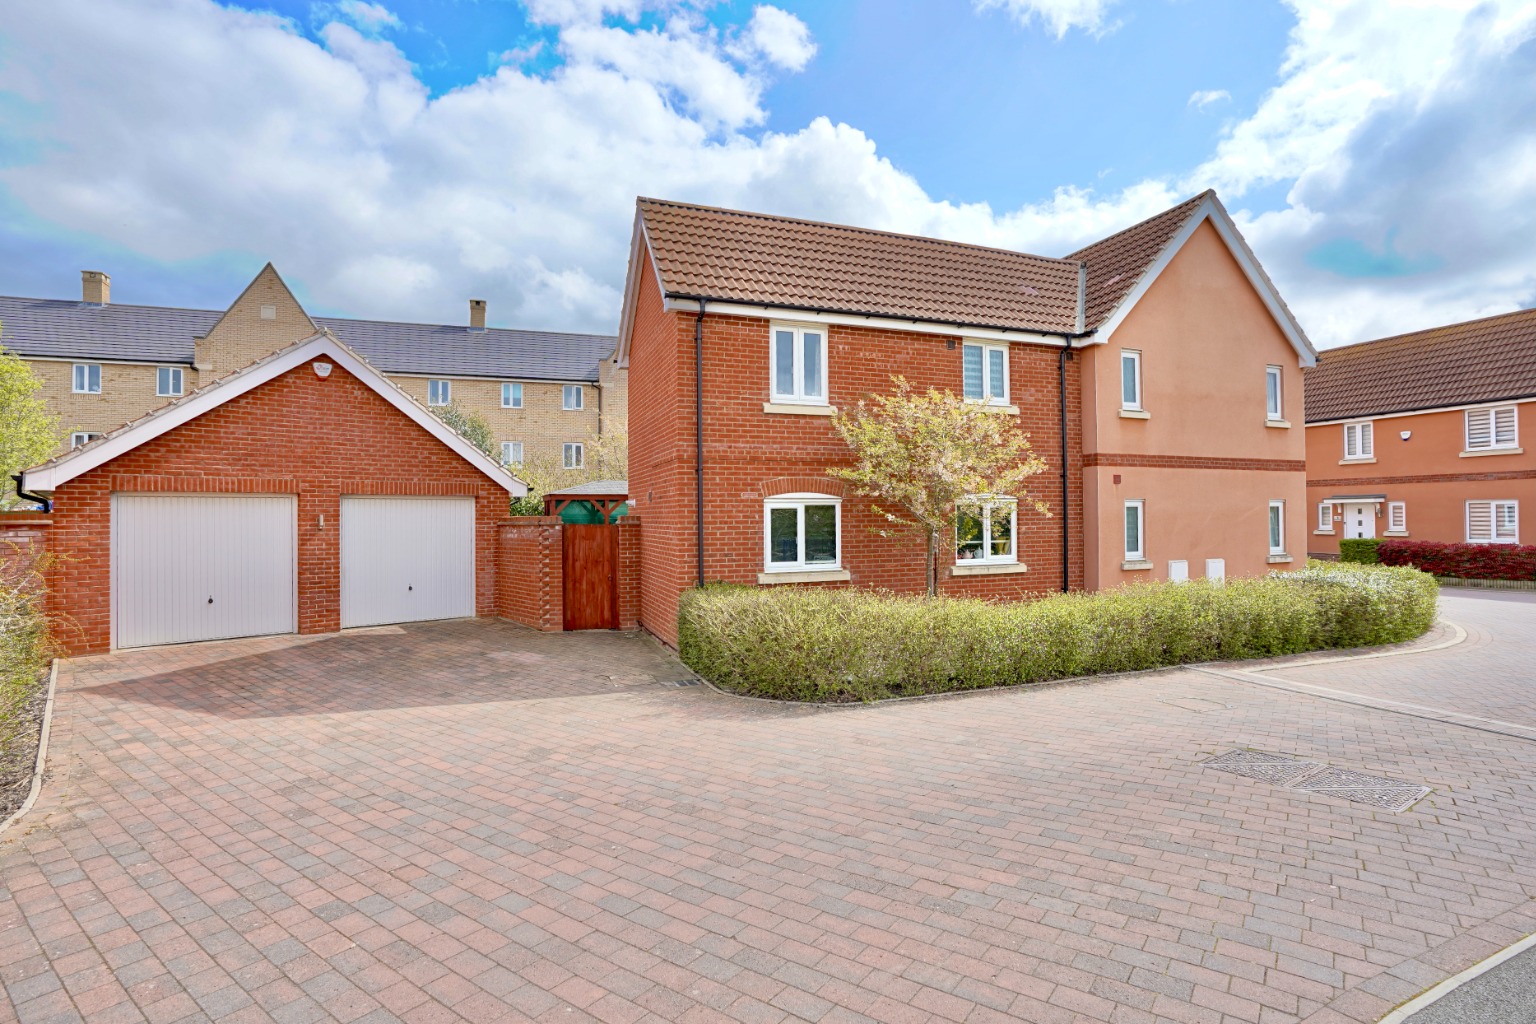 4 bed detached house for sale in Daffodil Close, St. Neots - Property Image 1